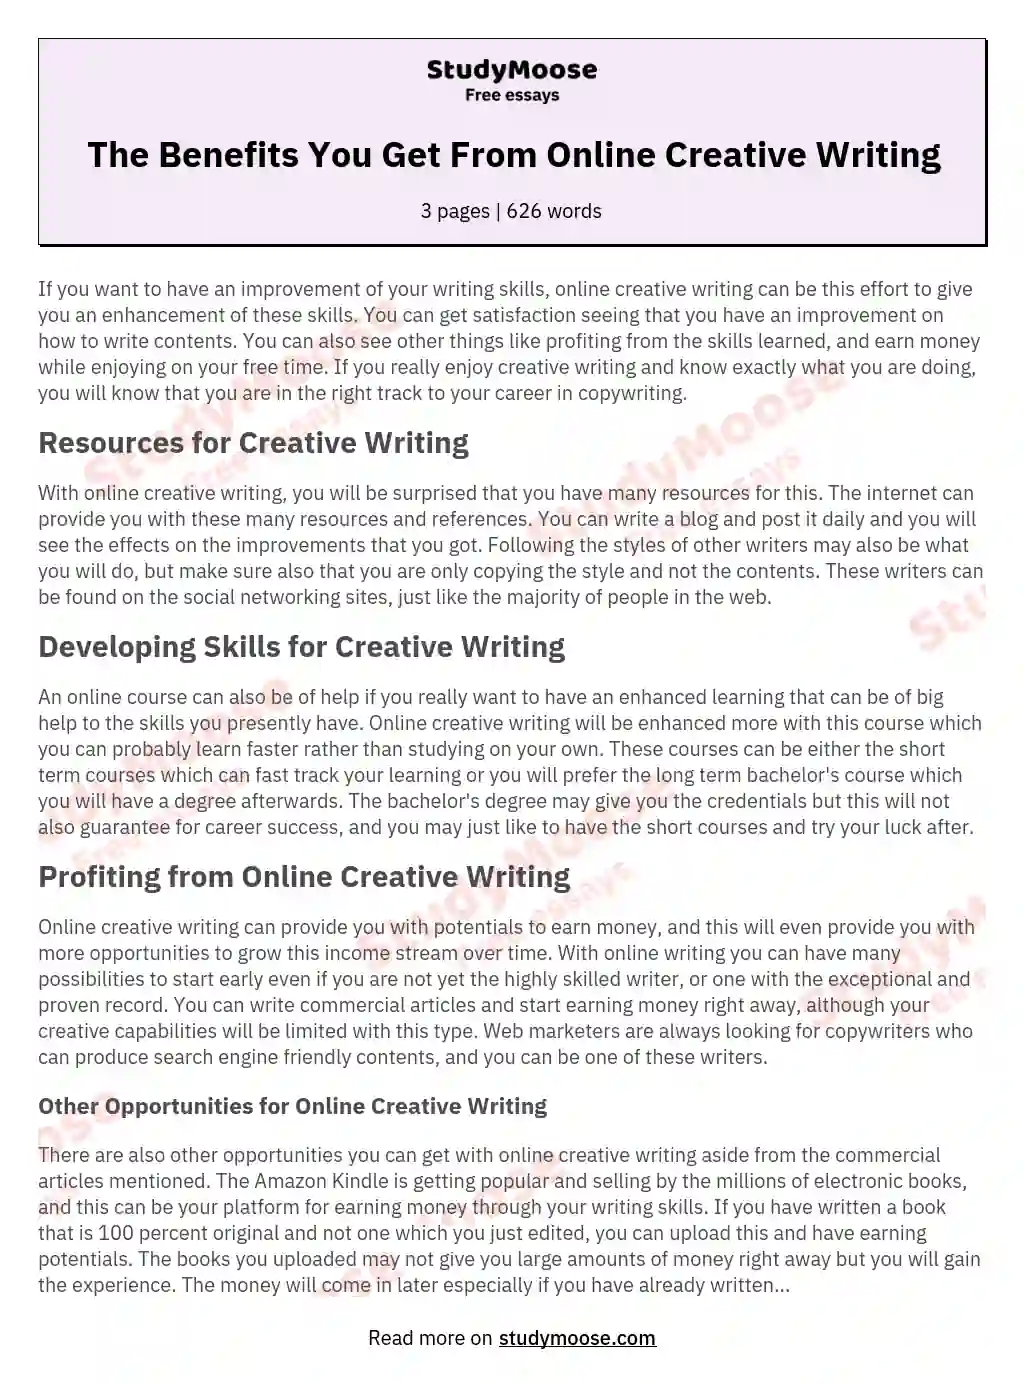 The Benefits You Get From Online Creative Writing